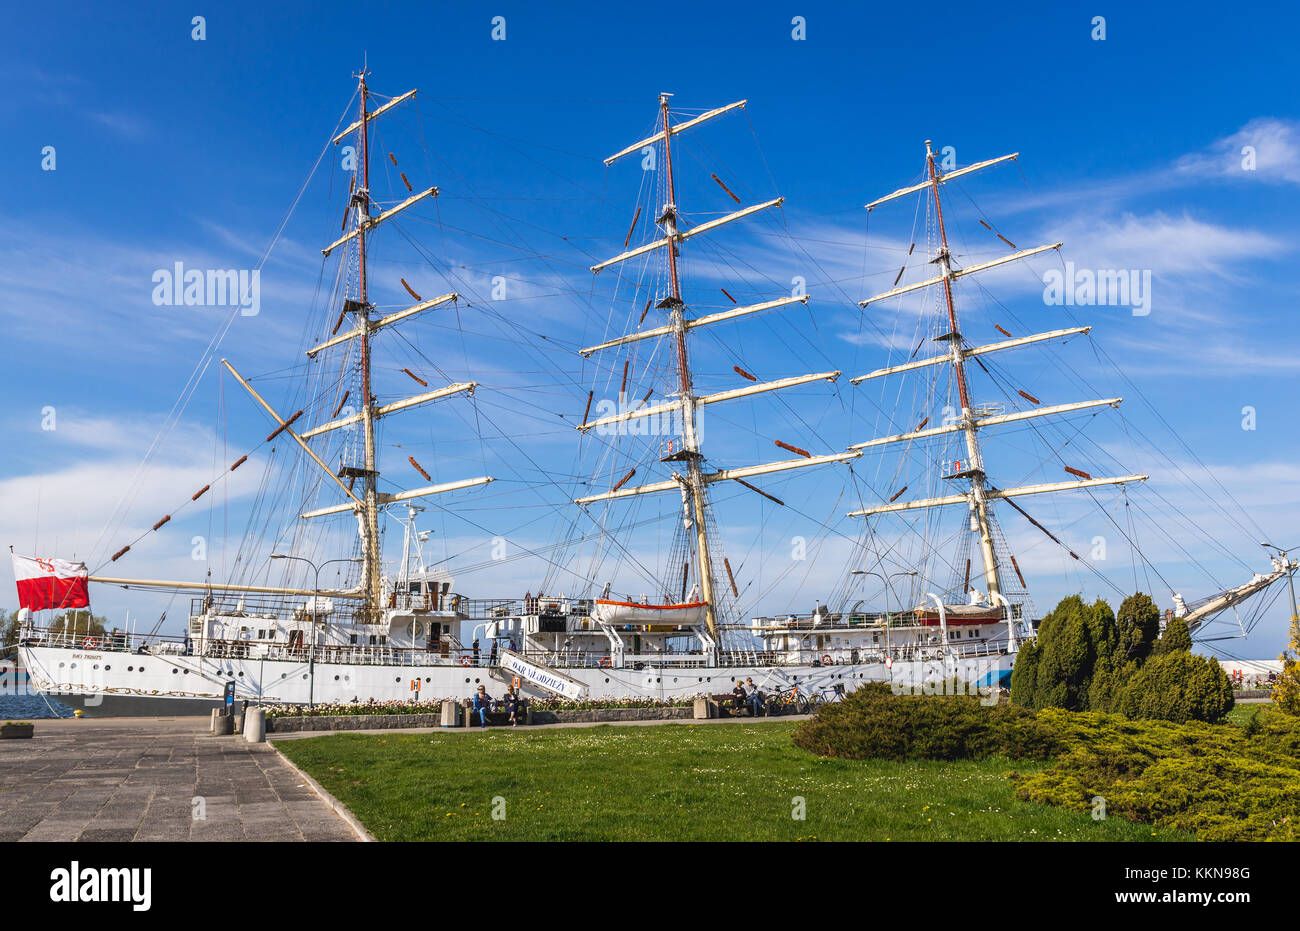 Sail training ship Dar Mlodziezy (Gift of the Youth) in Port of Gdynia city, Pomeranian Voivodeship of Poland Stock Photo